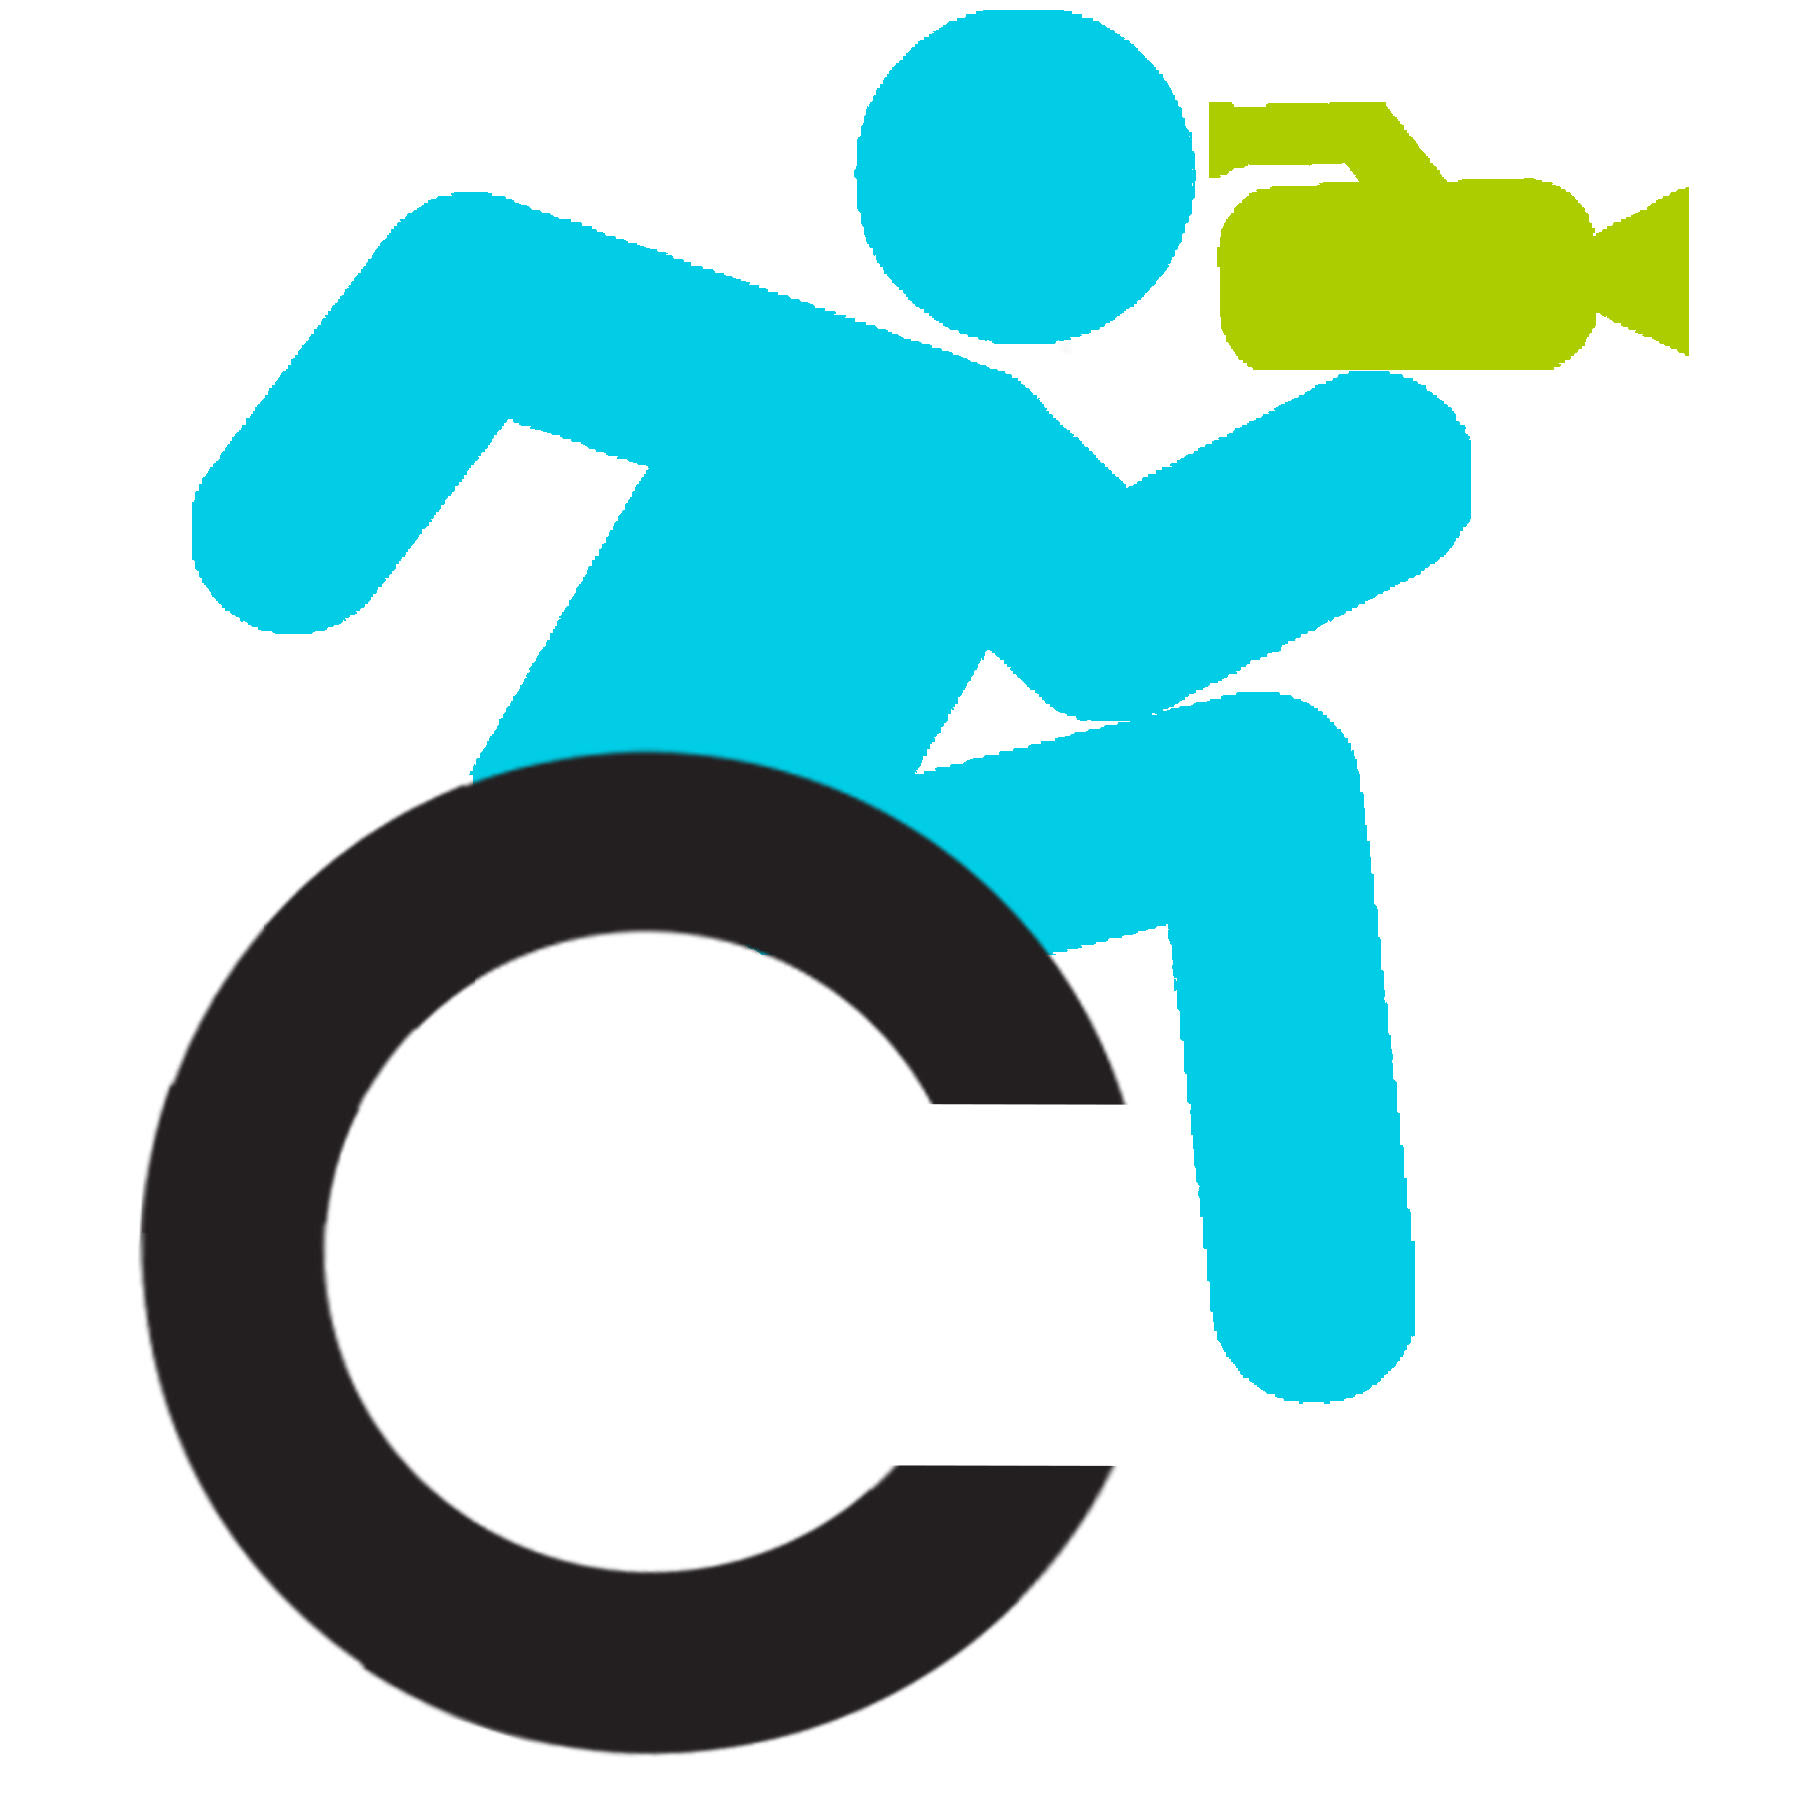 Cinema Touching Disability icon: a variation on the Accessibility icon, where a blue, seated figure is leaning forward with a green video camera held up to its face. It sits on a black C, which recalls the wheel of a wheelchair.